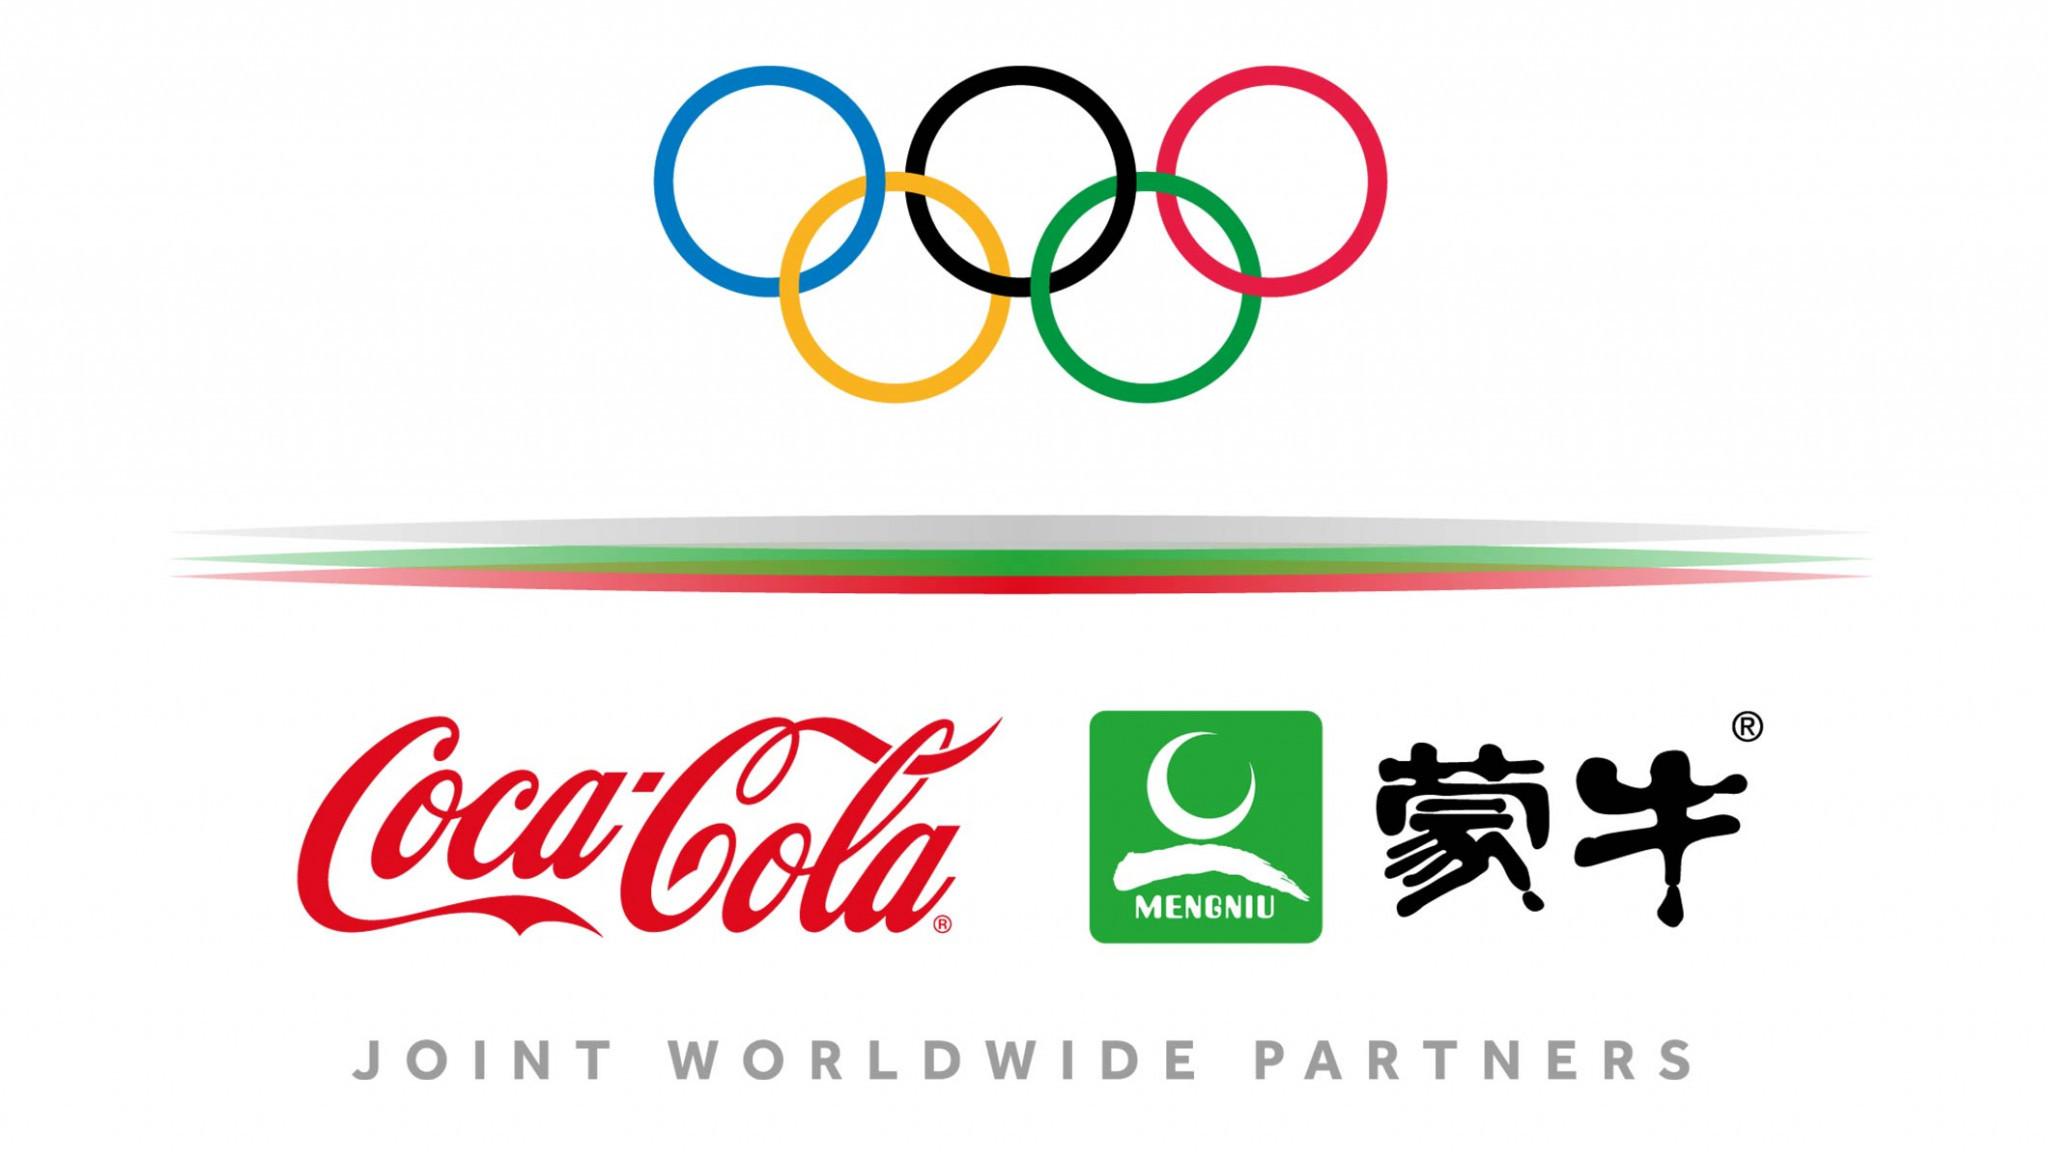 CocaCola extends Olympic sponsorship until 2032 in partnership with